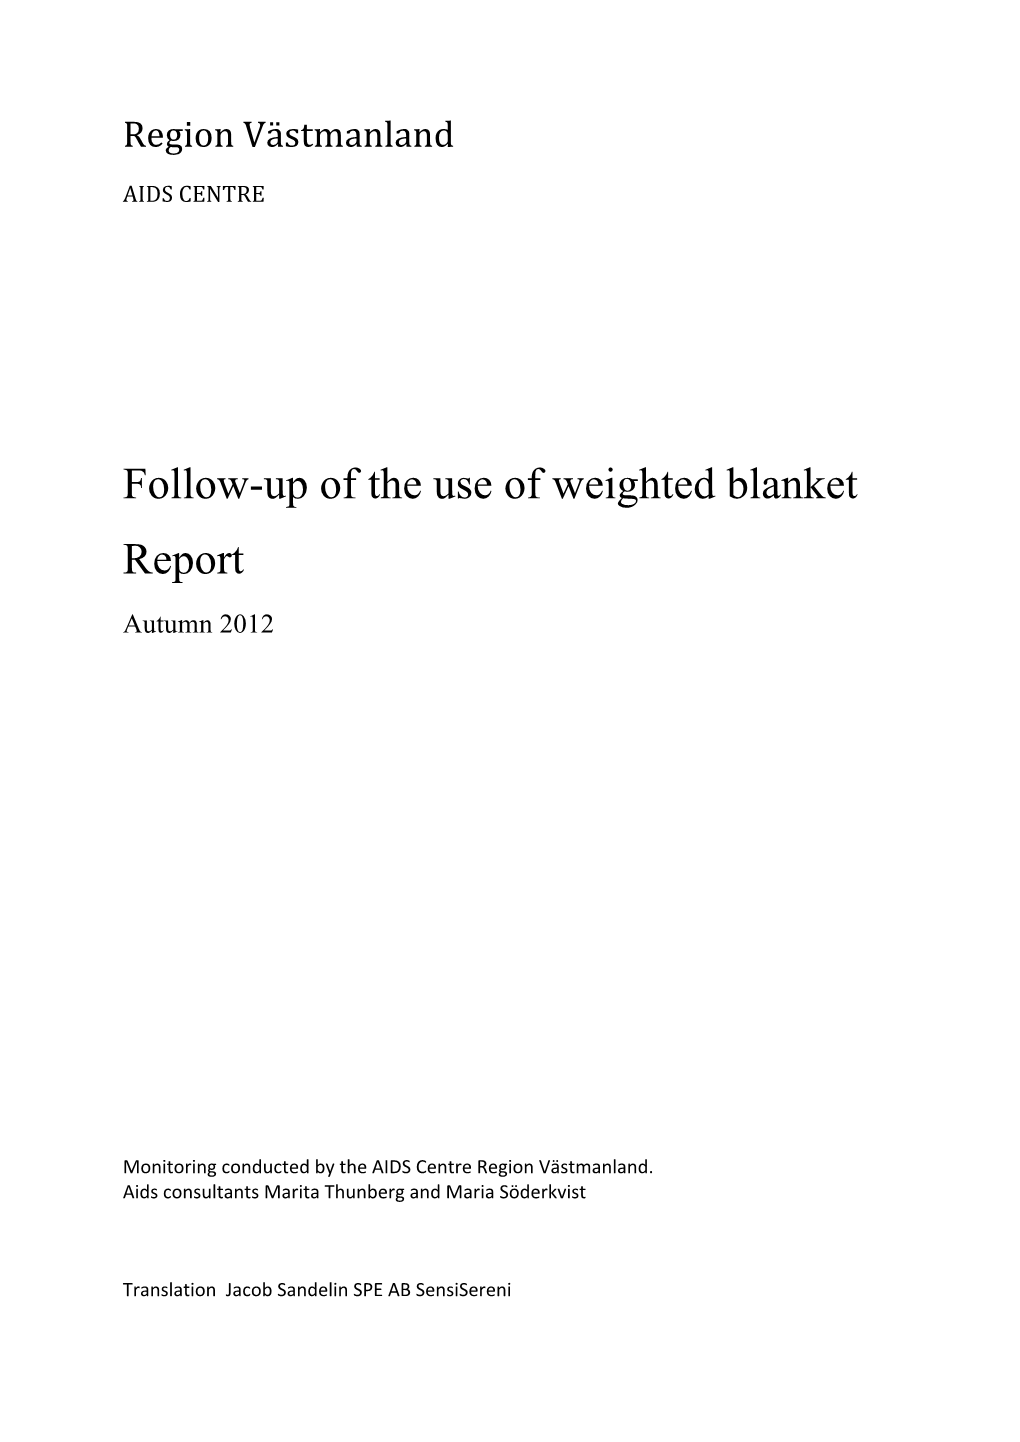 Follow-Up of the Use of Weighted Blanket Report